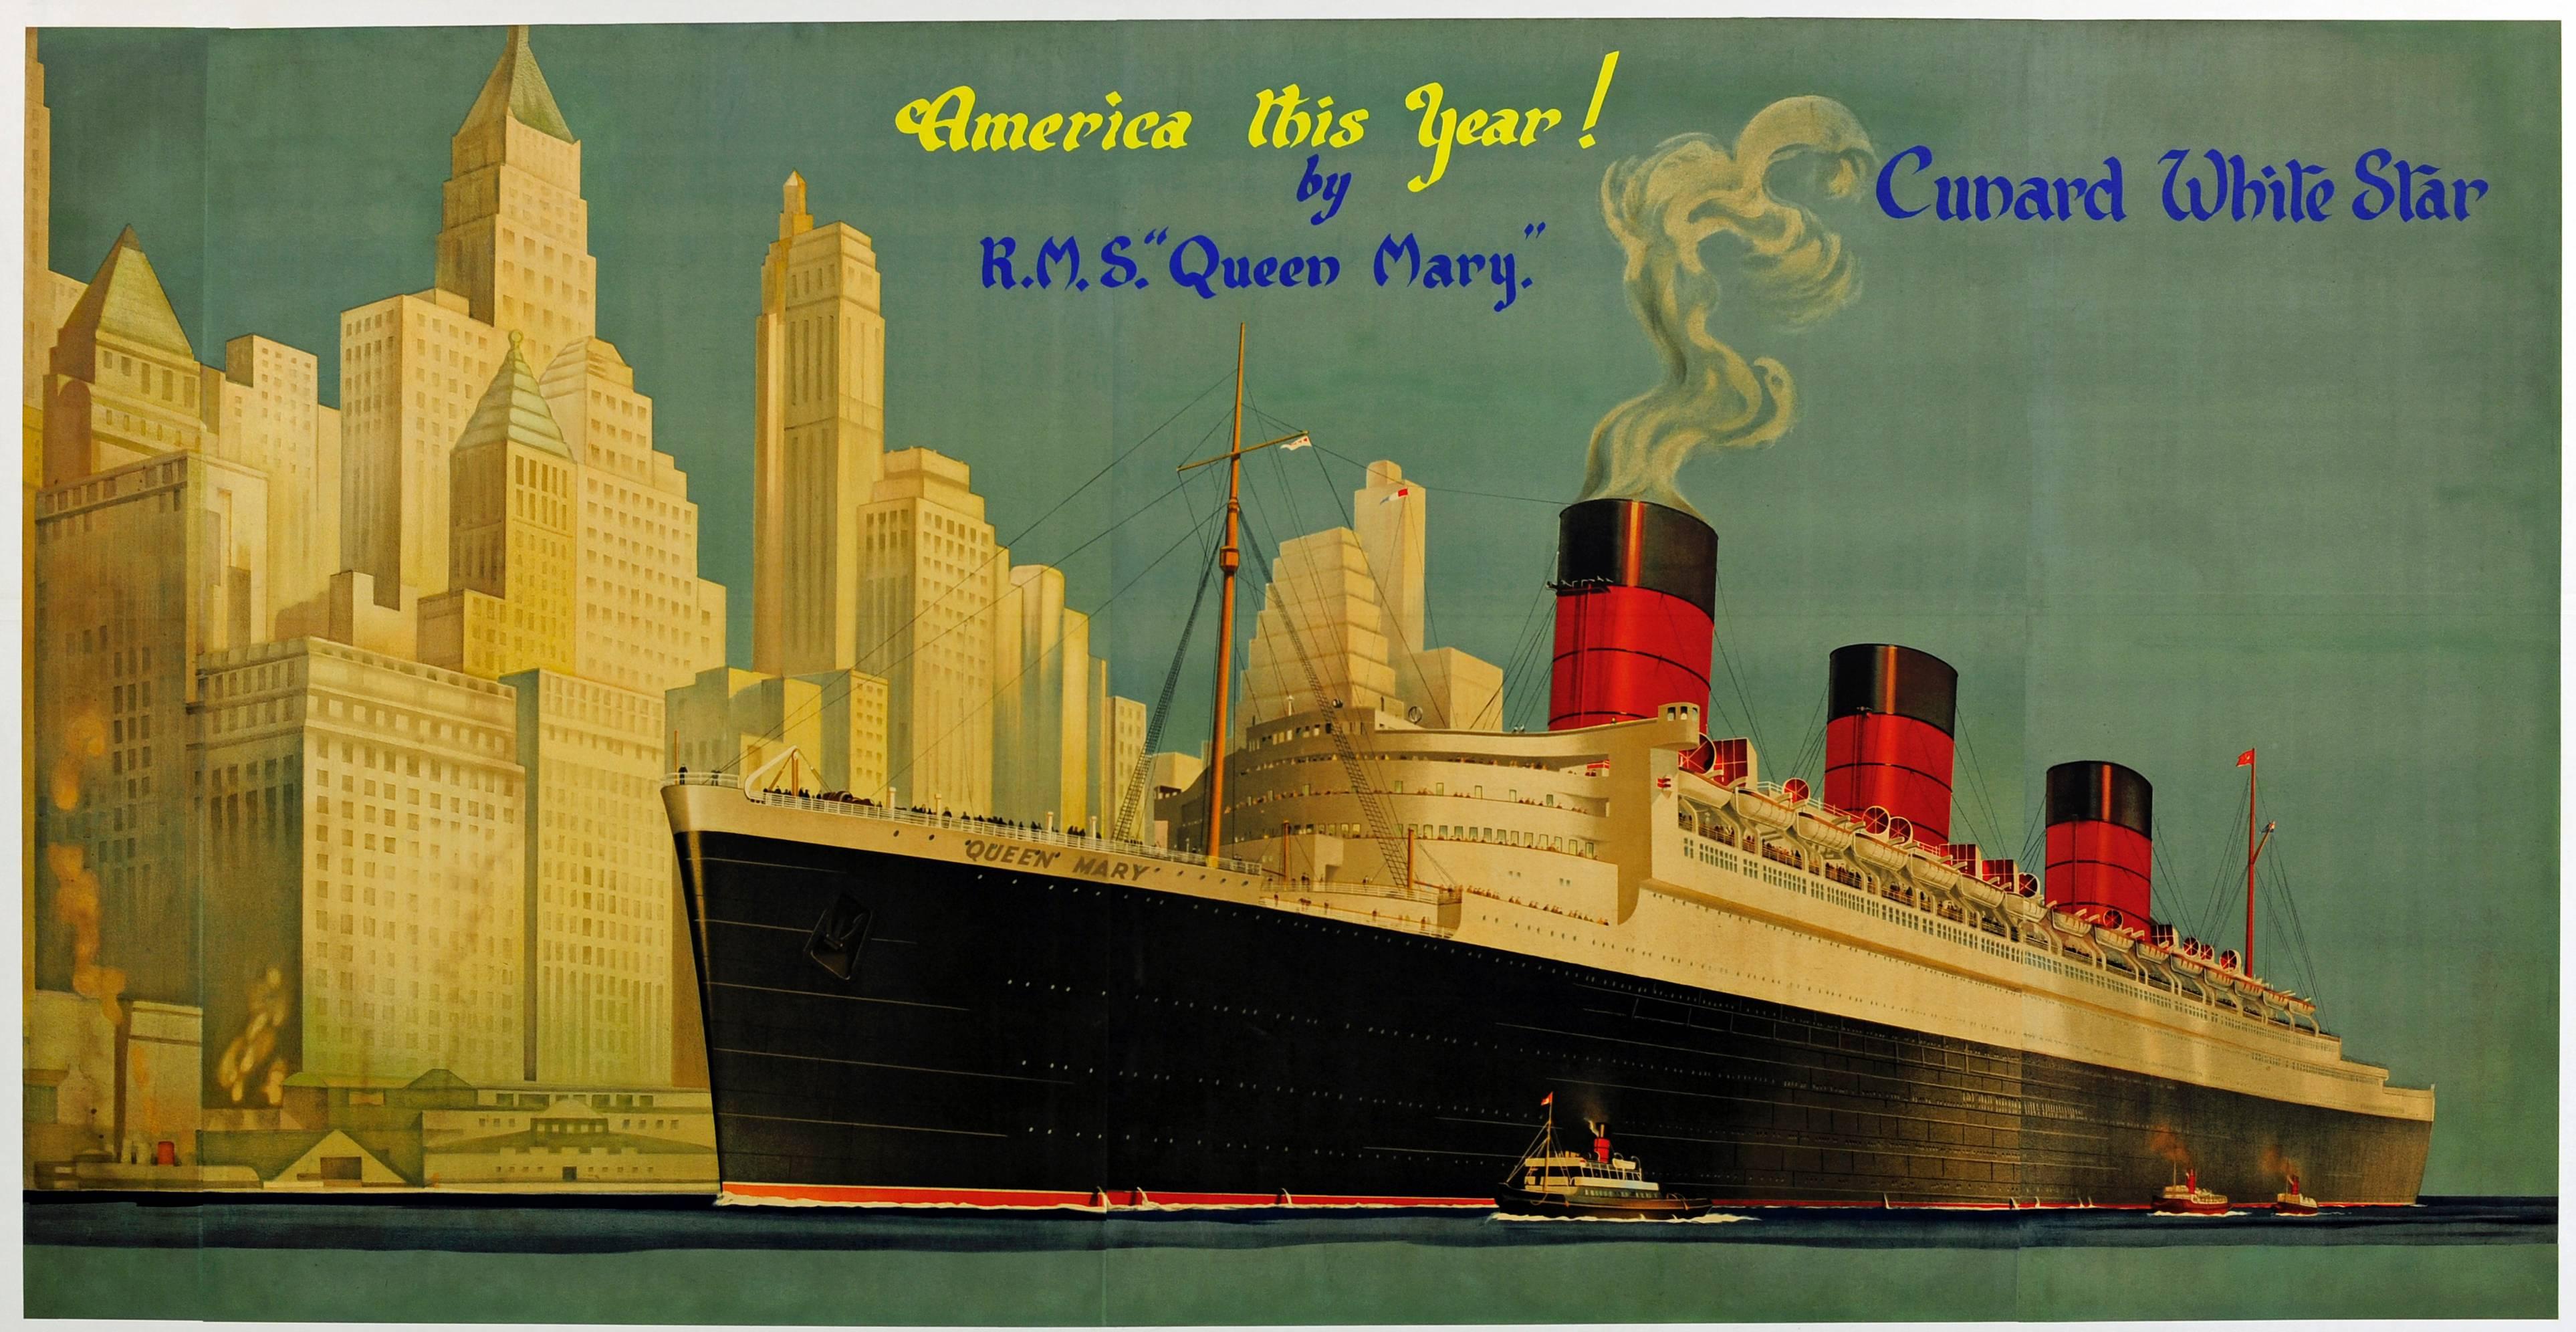 Art Ad Cunard White Star Queen Mary Travel  Deco  Poster Print